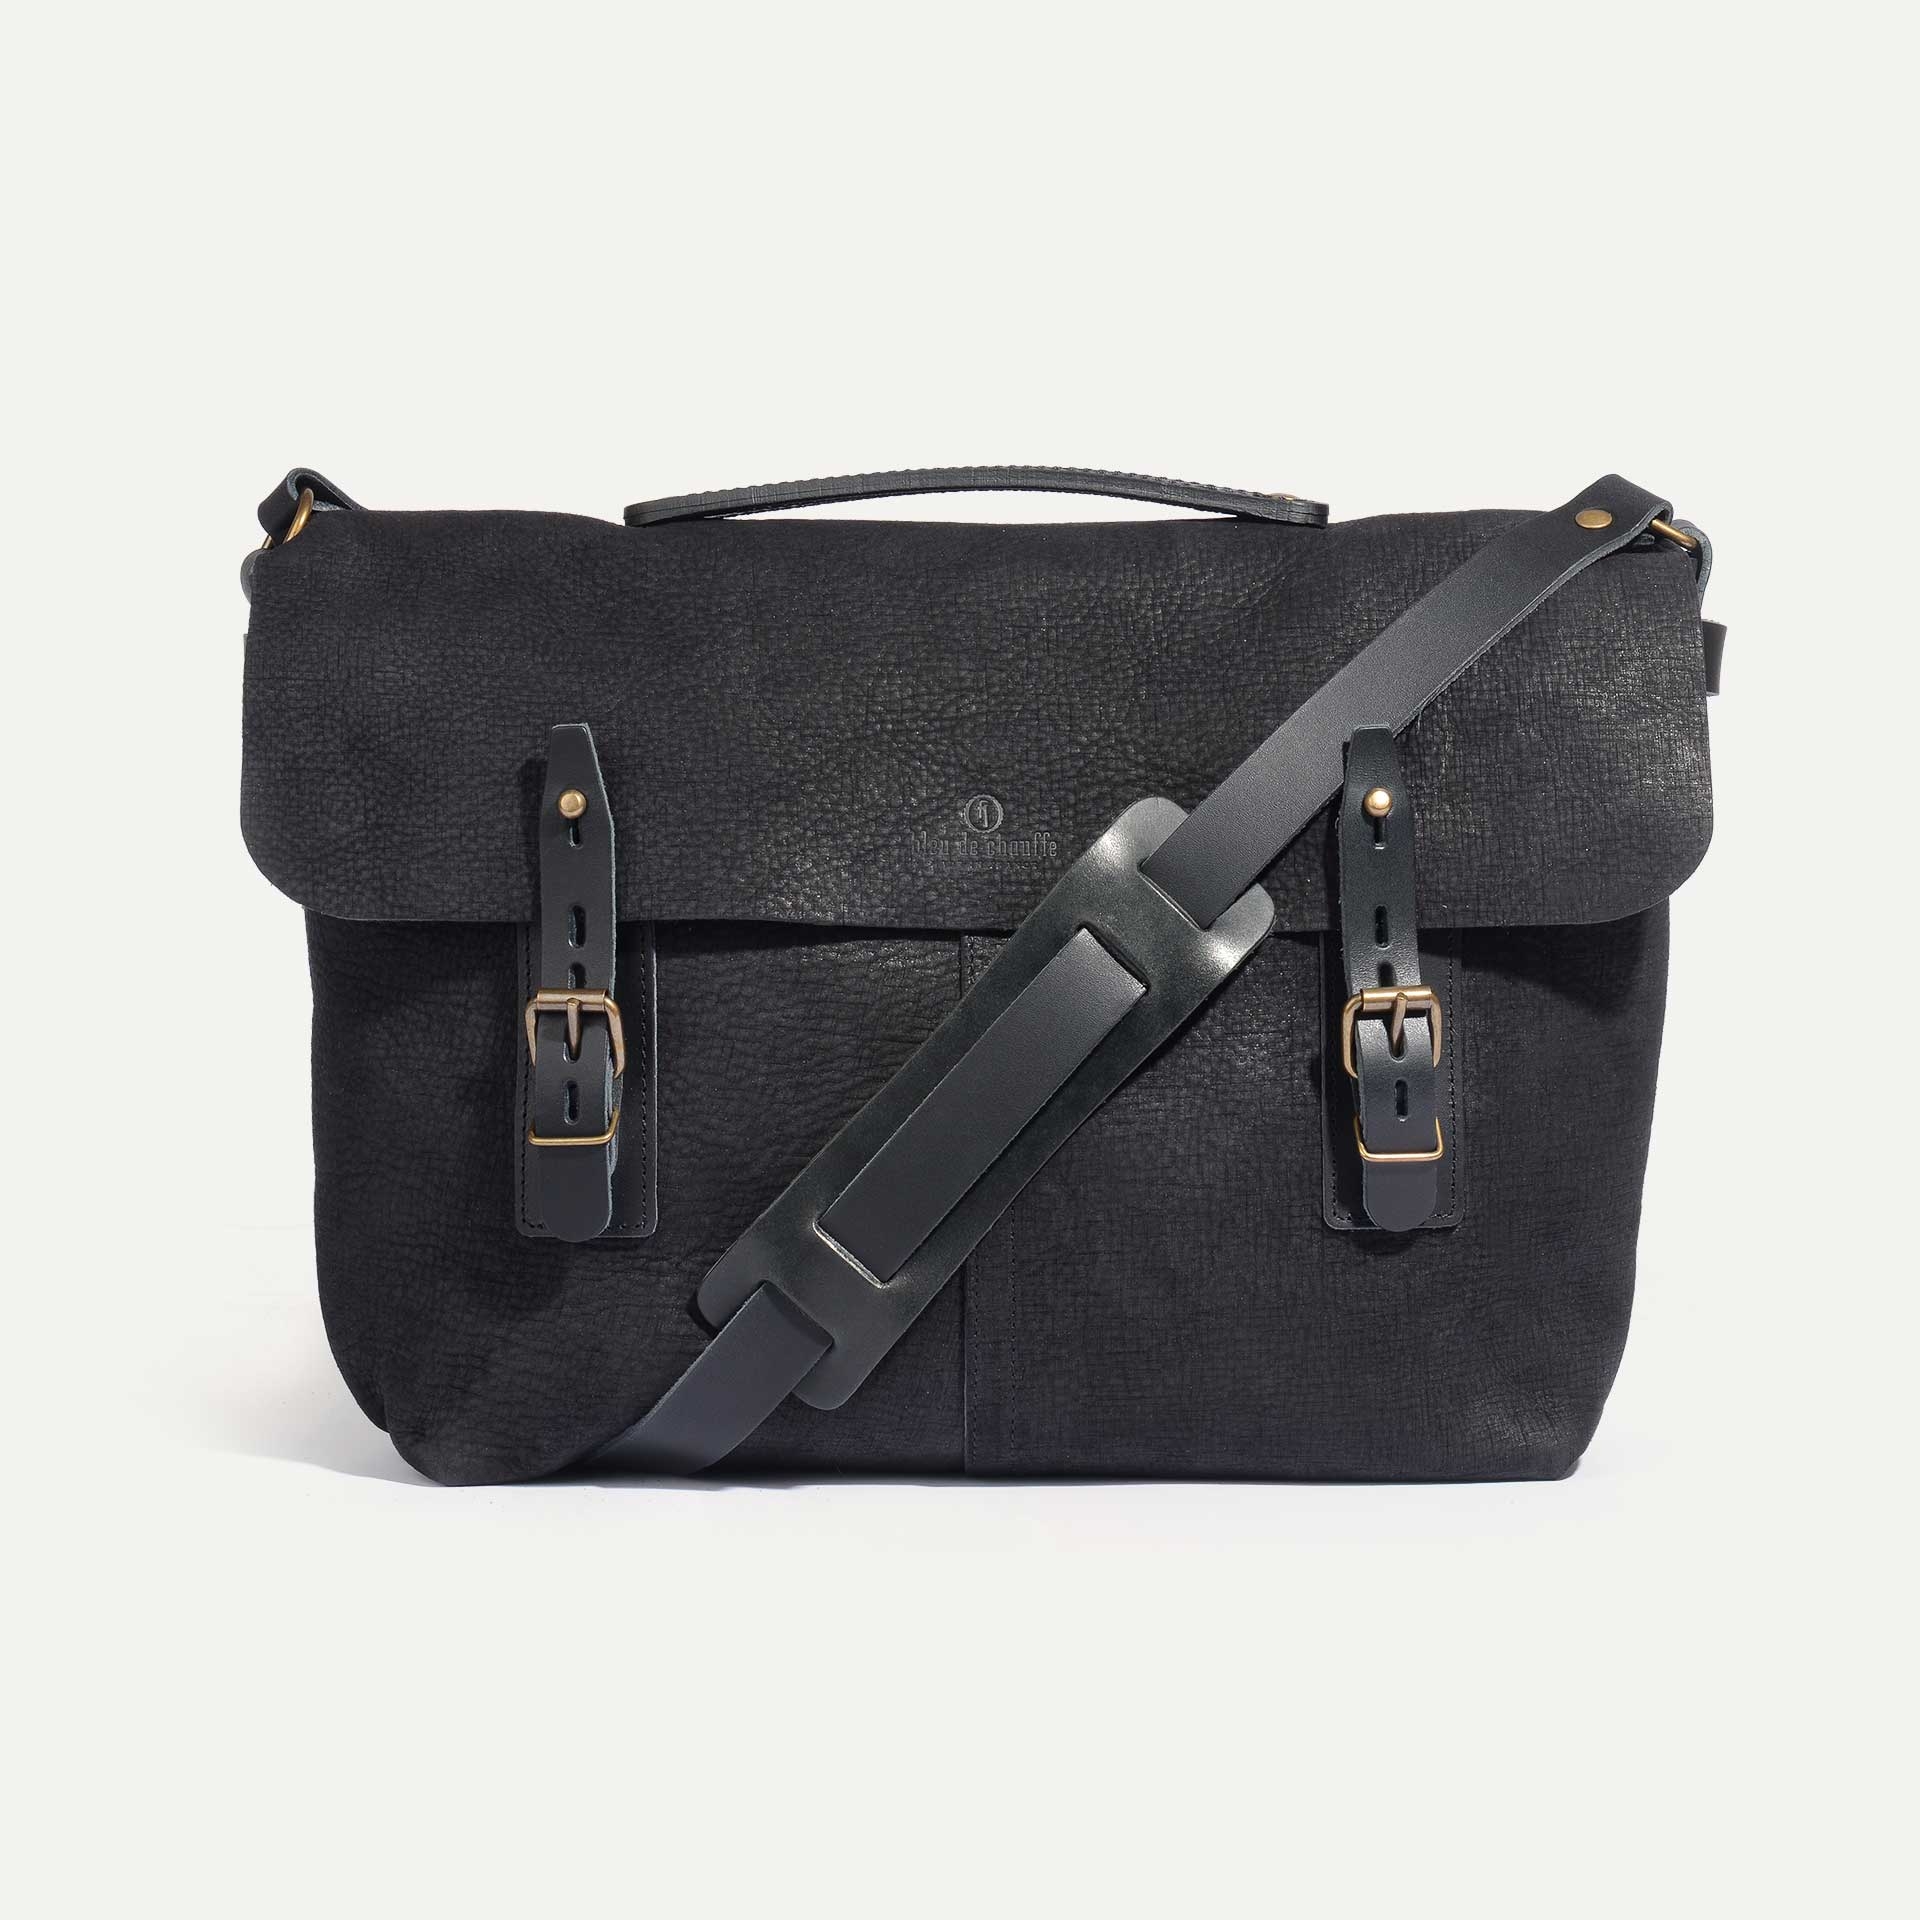 Lucien Satchel bag - Charcoal Black / Waxed Leather (image n°1)